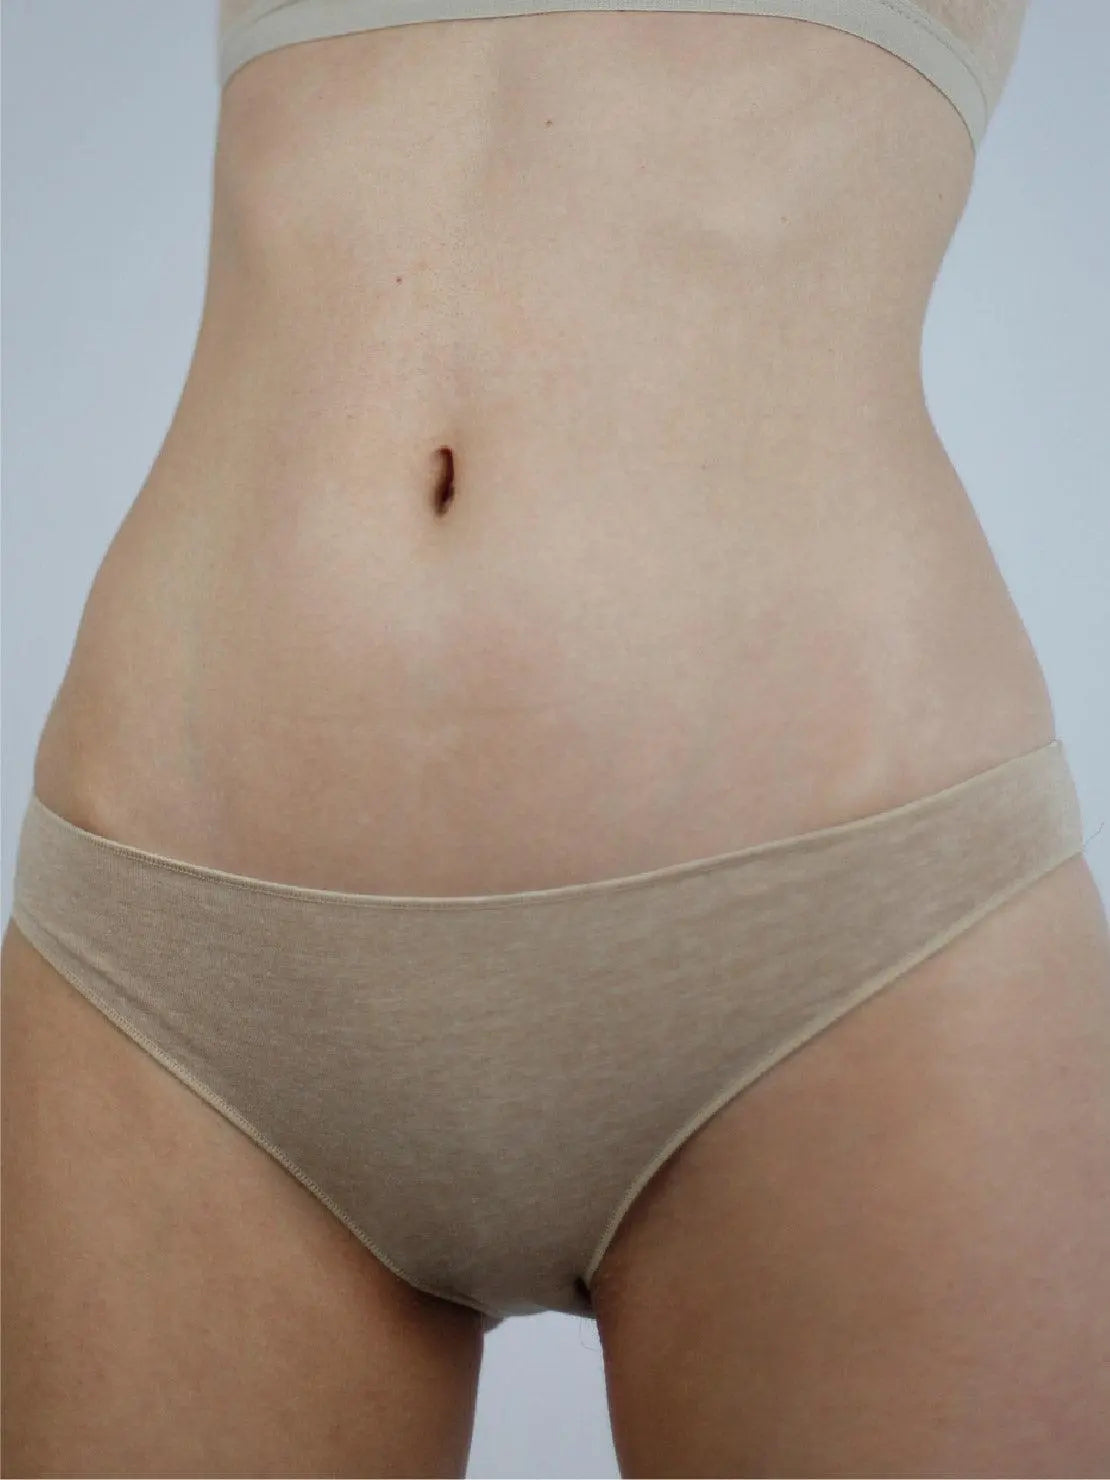 Close-up of a person wearing Earth Classic Organic Cotton Briefs - Talk Under Light and a matching crop top from Bassalstore, focusing on the midsection and lower torso. The background is plain and light-colored.